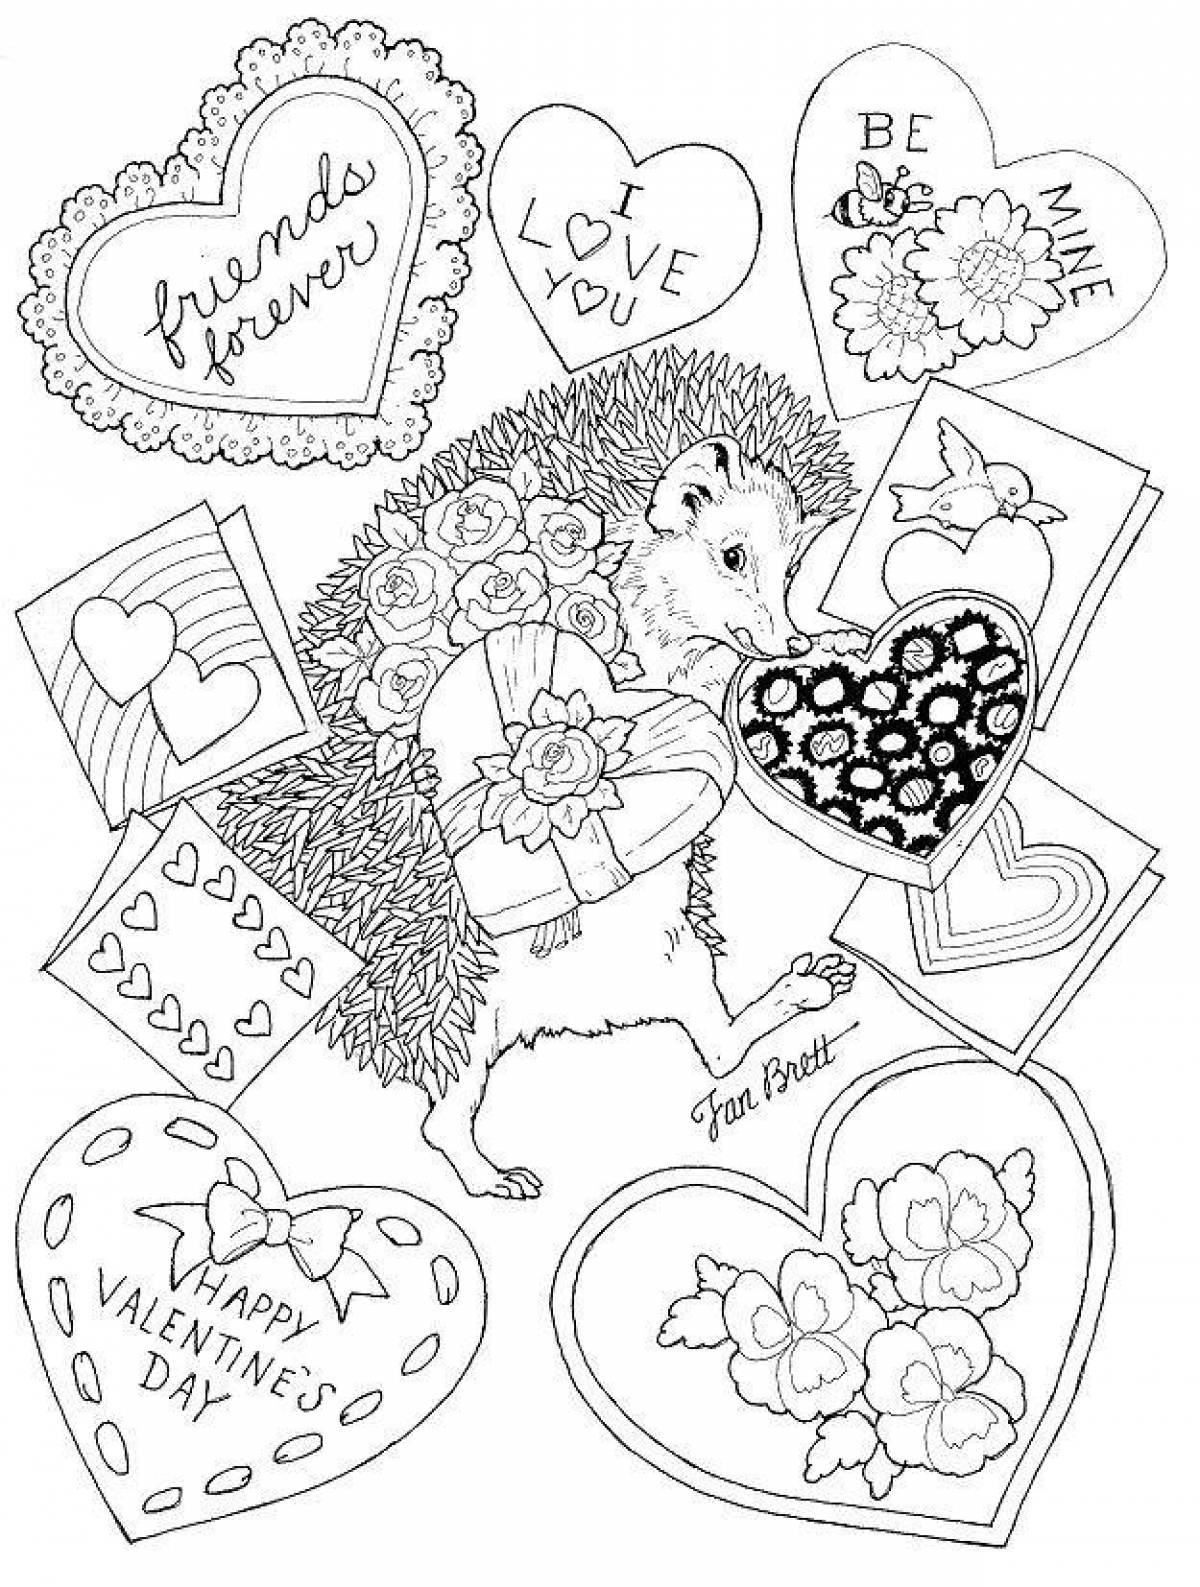 Fairy valentine's day coloring book